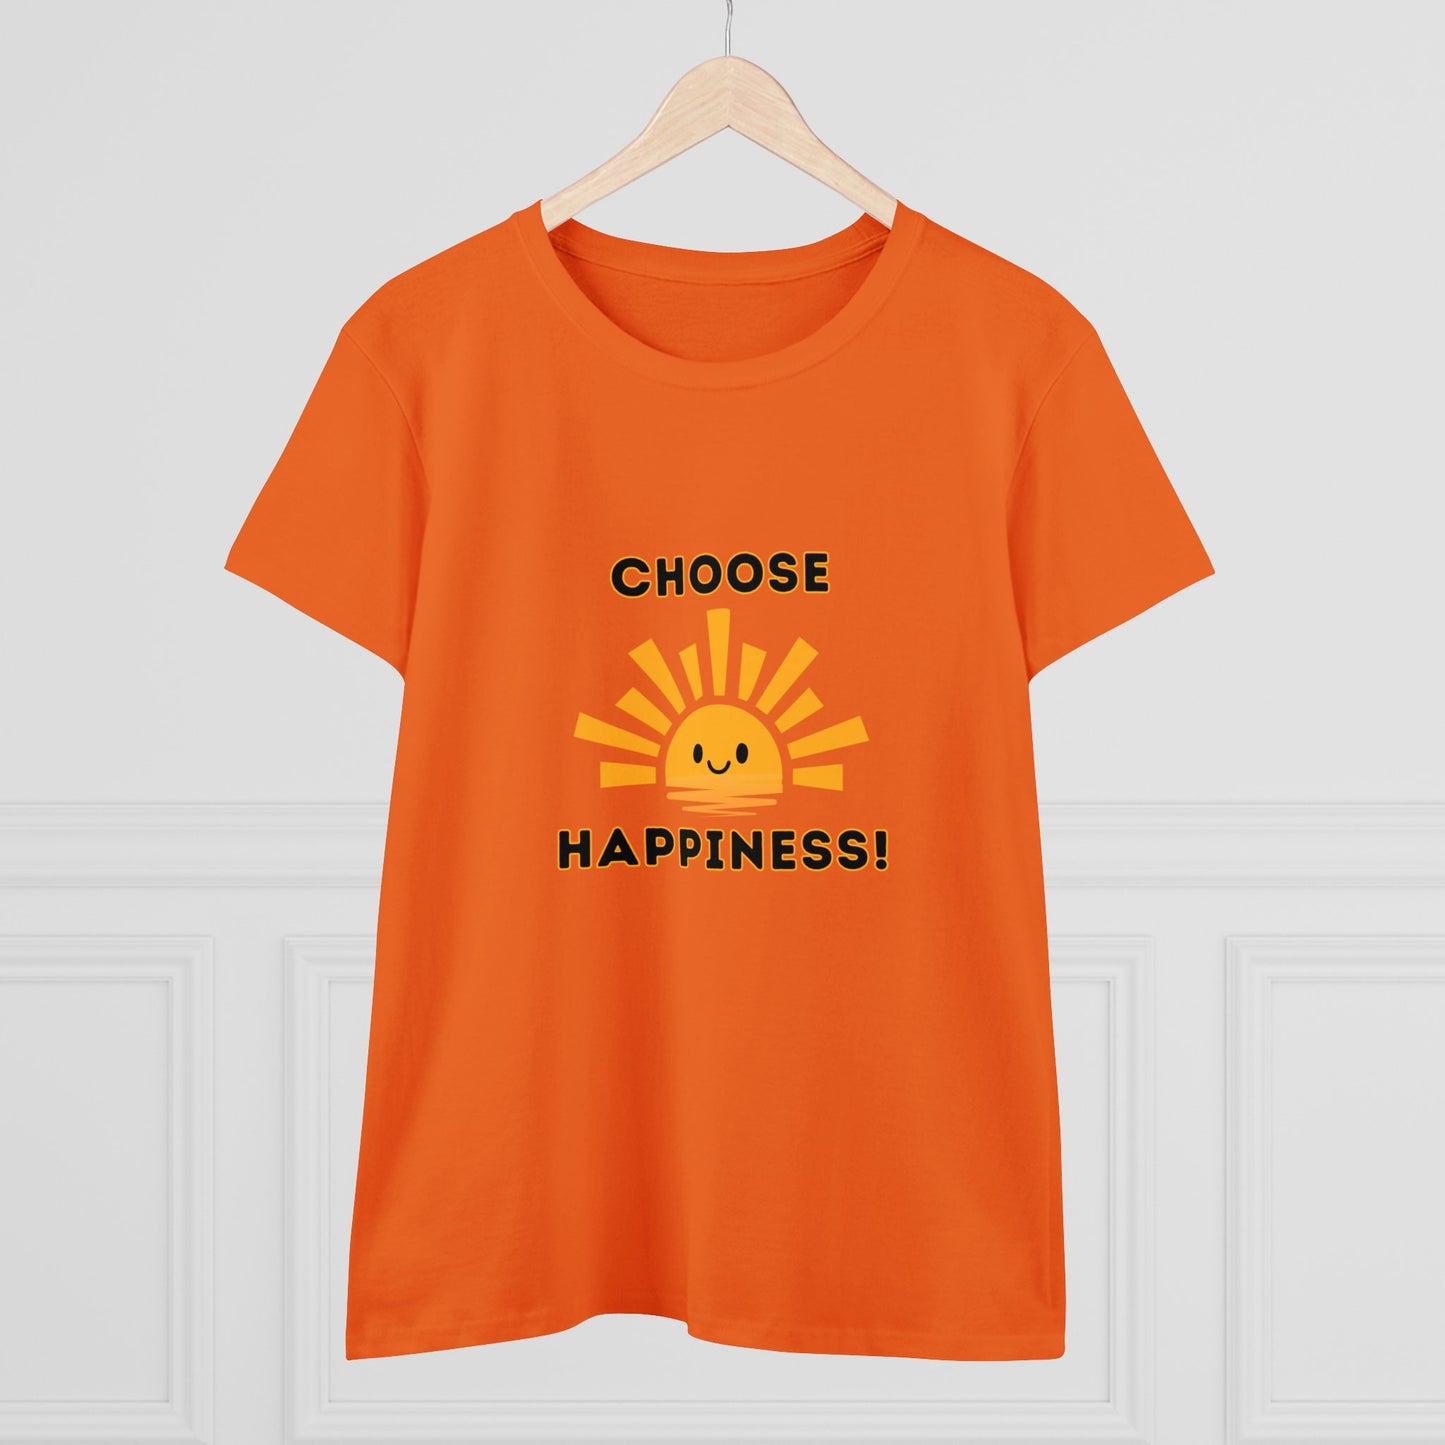 Positive, Choose Happiness- Adult, Semi-fitted, Smaller Size Image, T-shirt